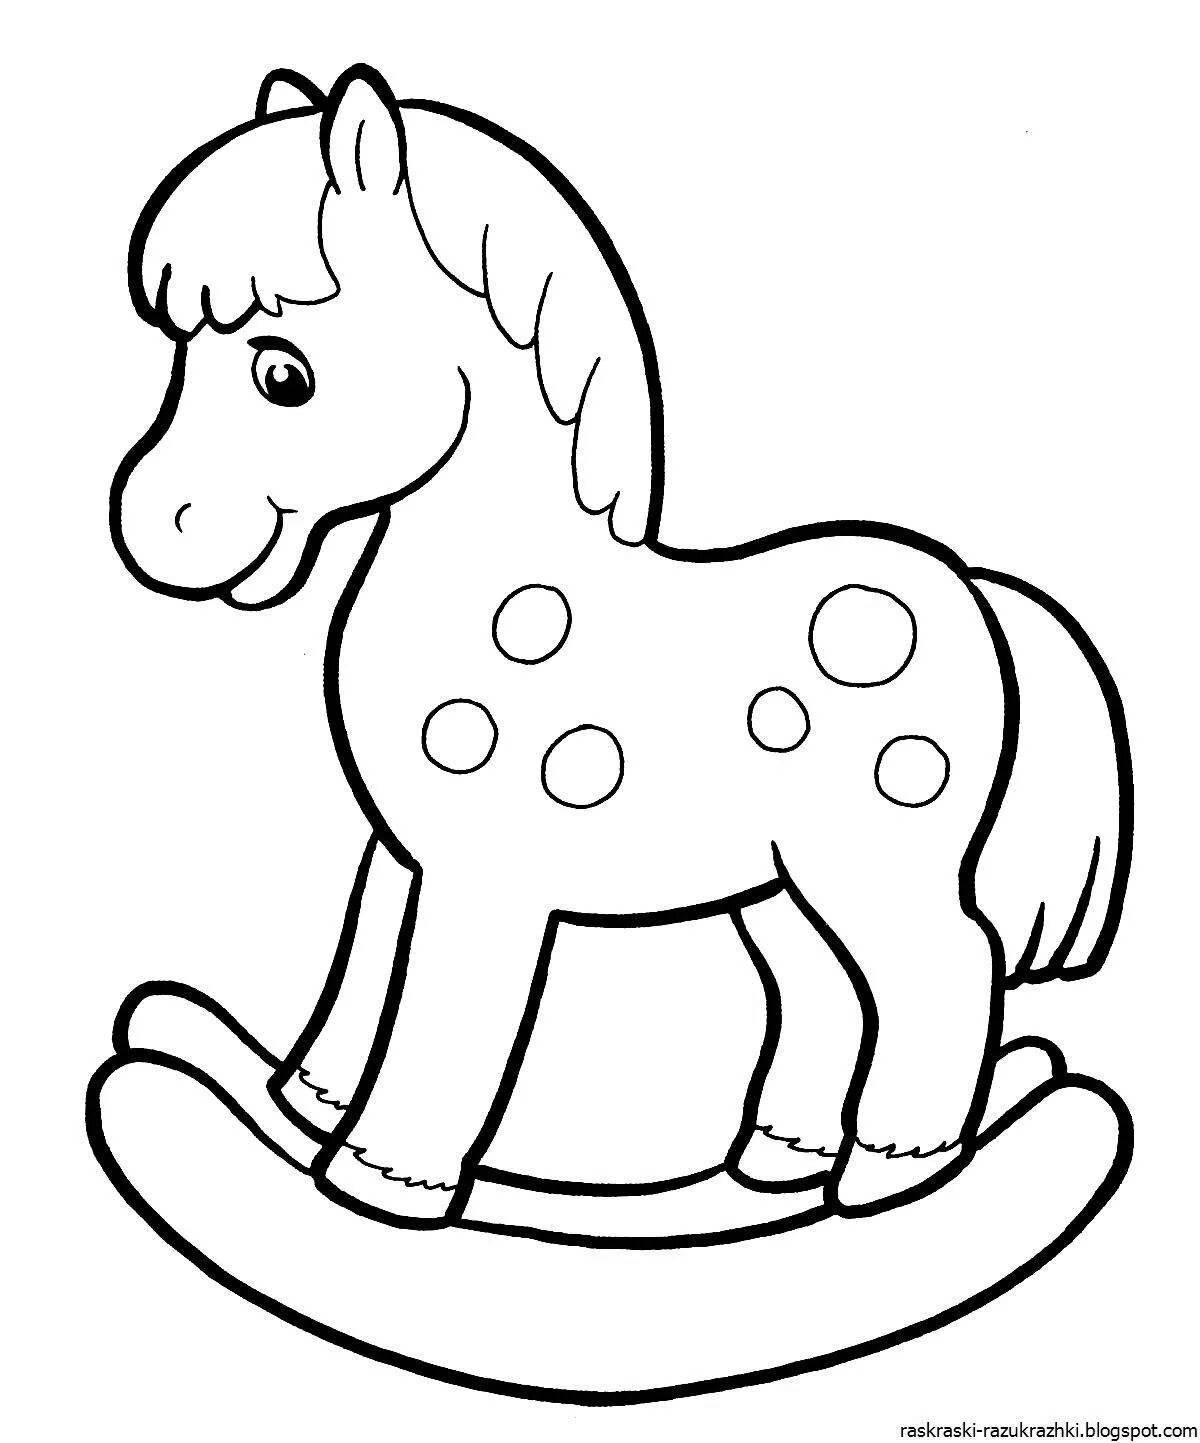 Major horse coloring book for 2-3 year olds